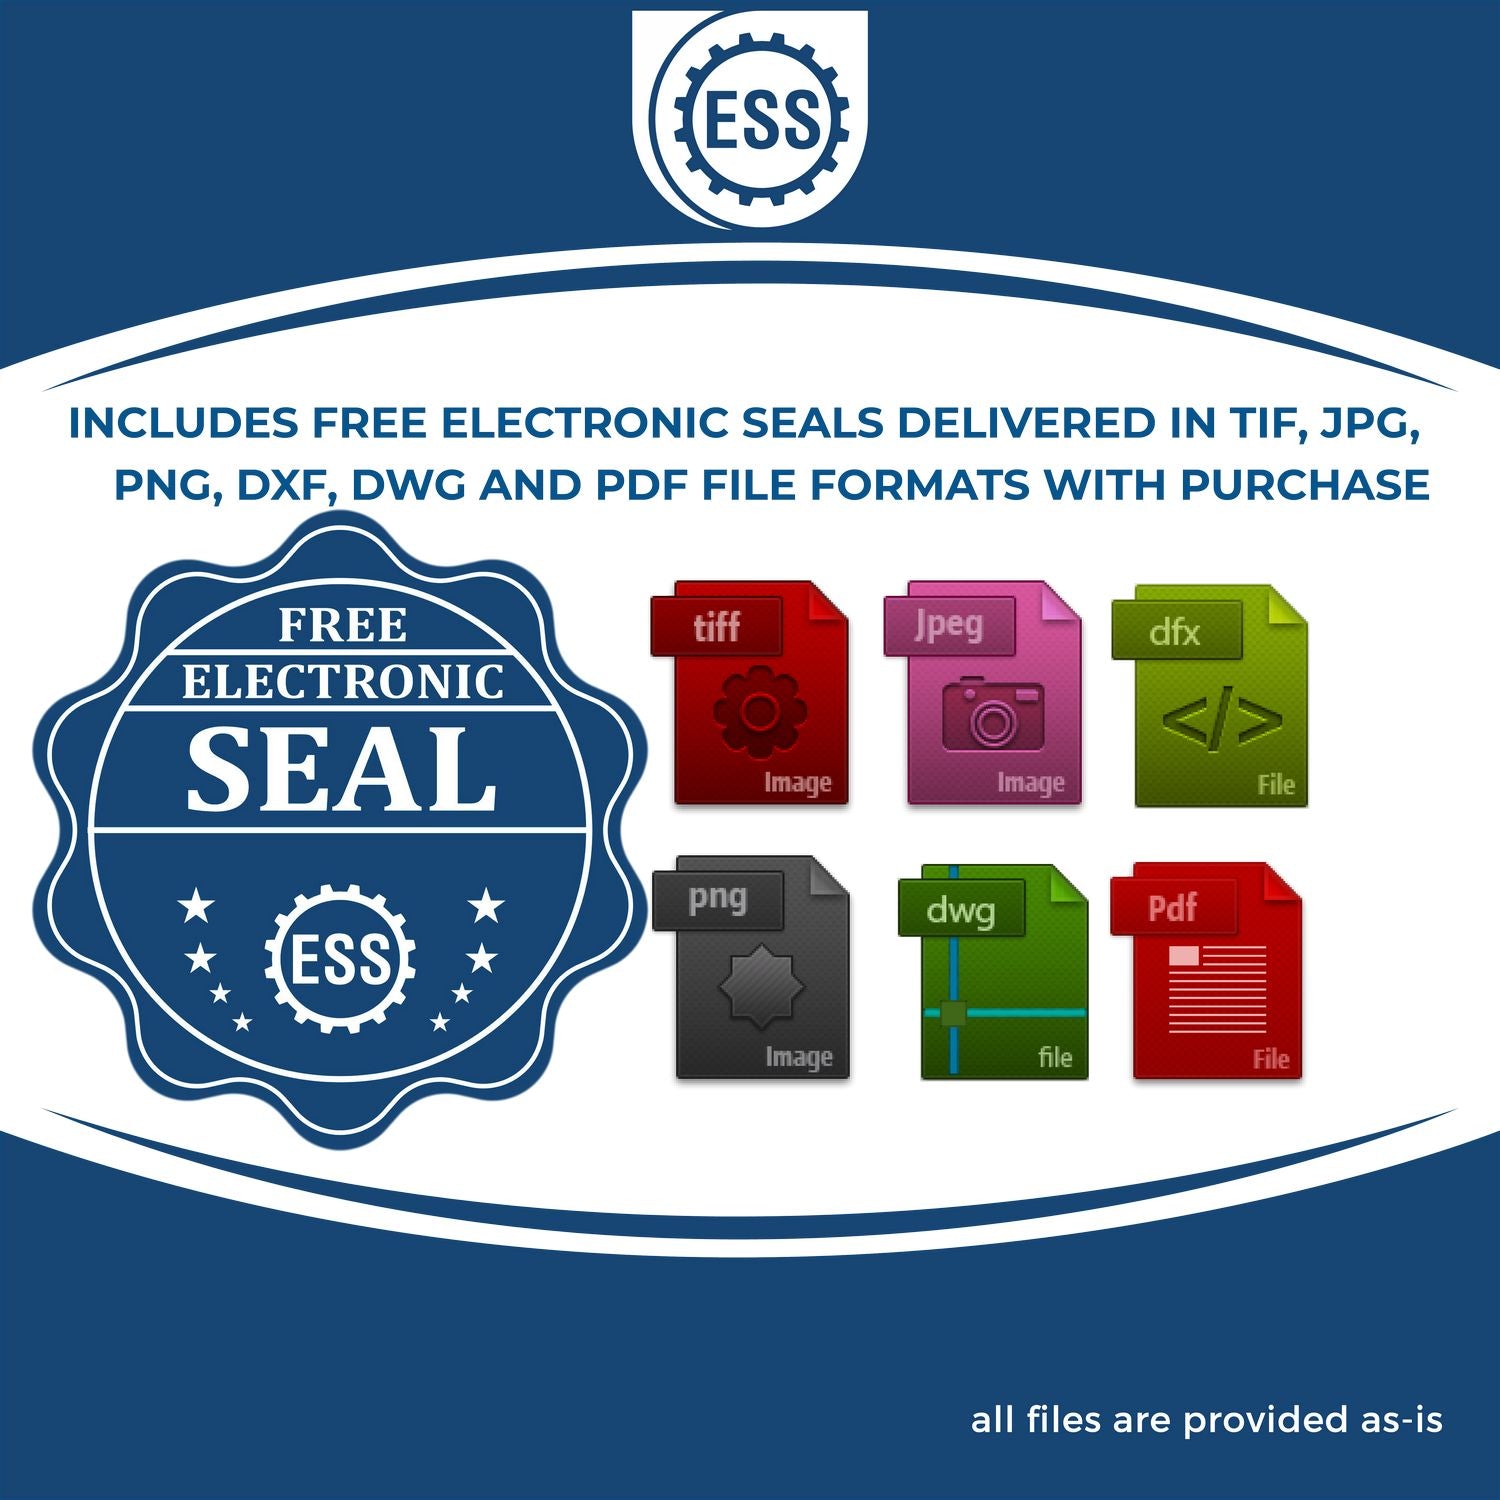 An infographic for the free electronic seal for the Kentucky Desk Landscape Architectural Seal Embosser illustrating the different file type icons such as DXF, DWG, TIF, JPG and PNG.